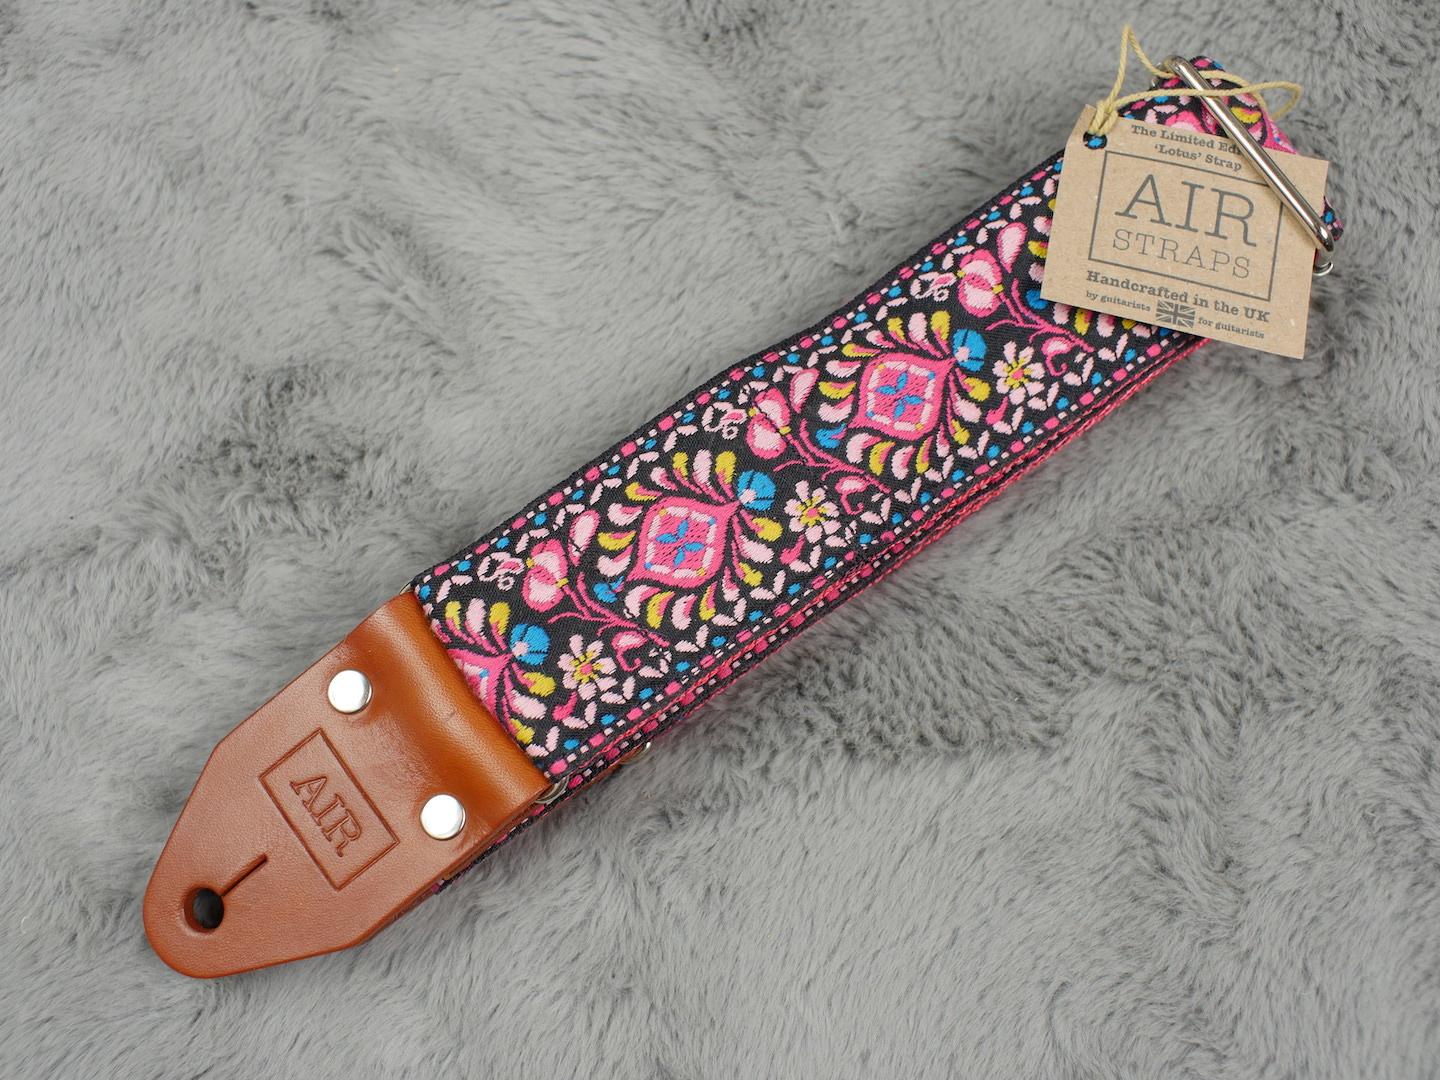 Air Straps Limited Edition 'Lotus' Guitar Strap